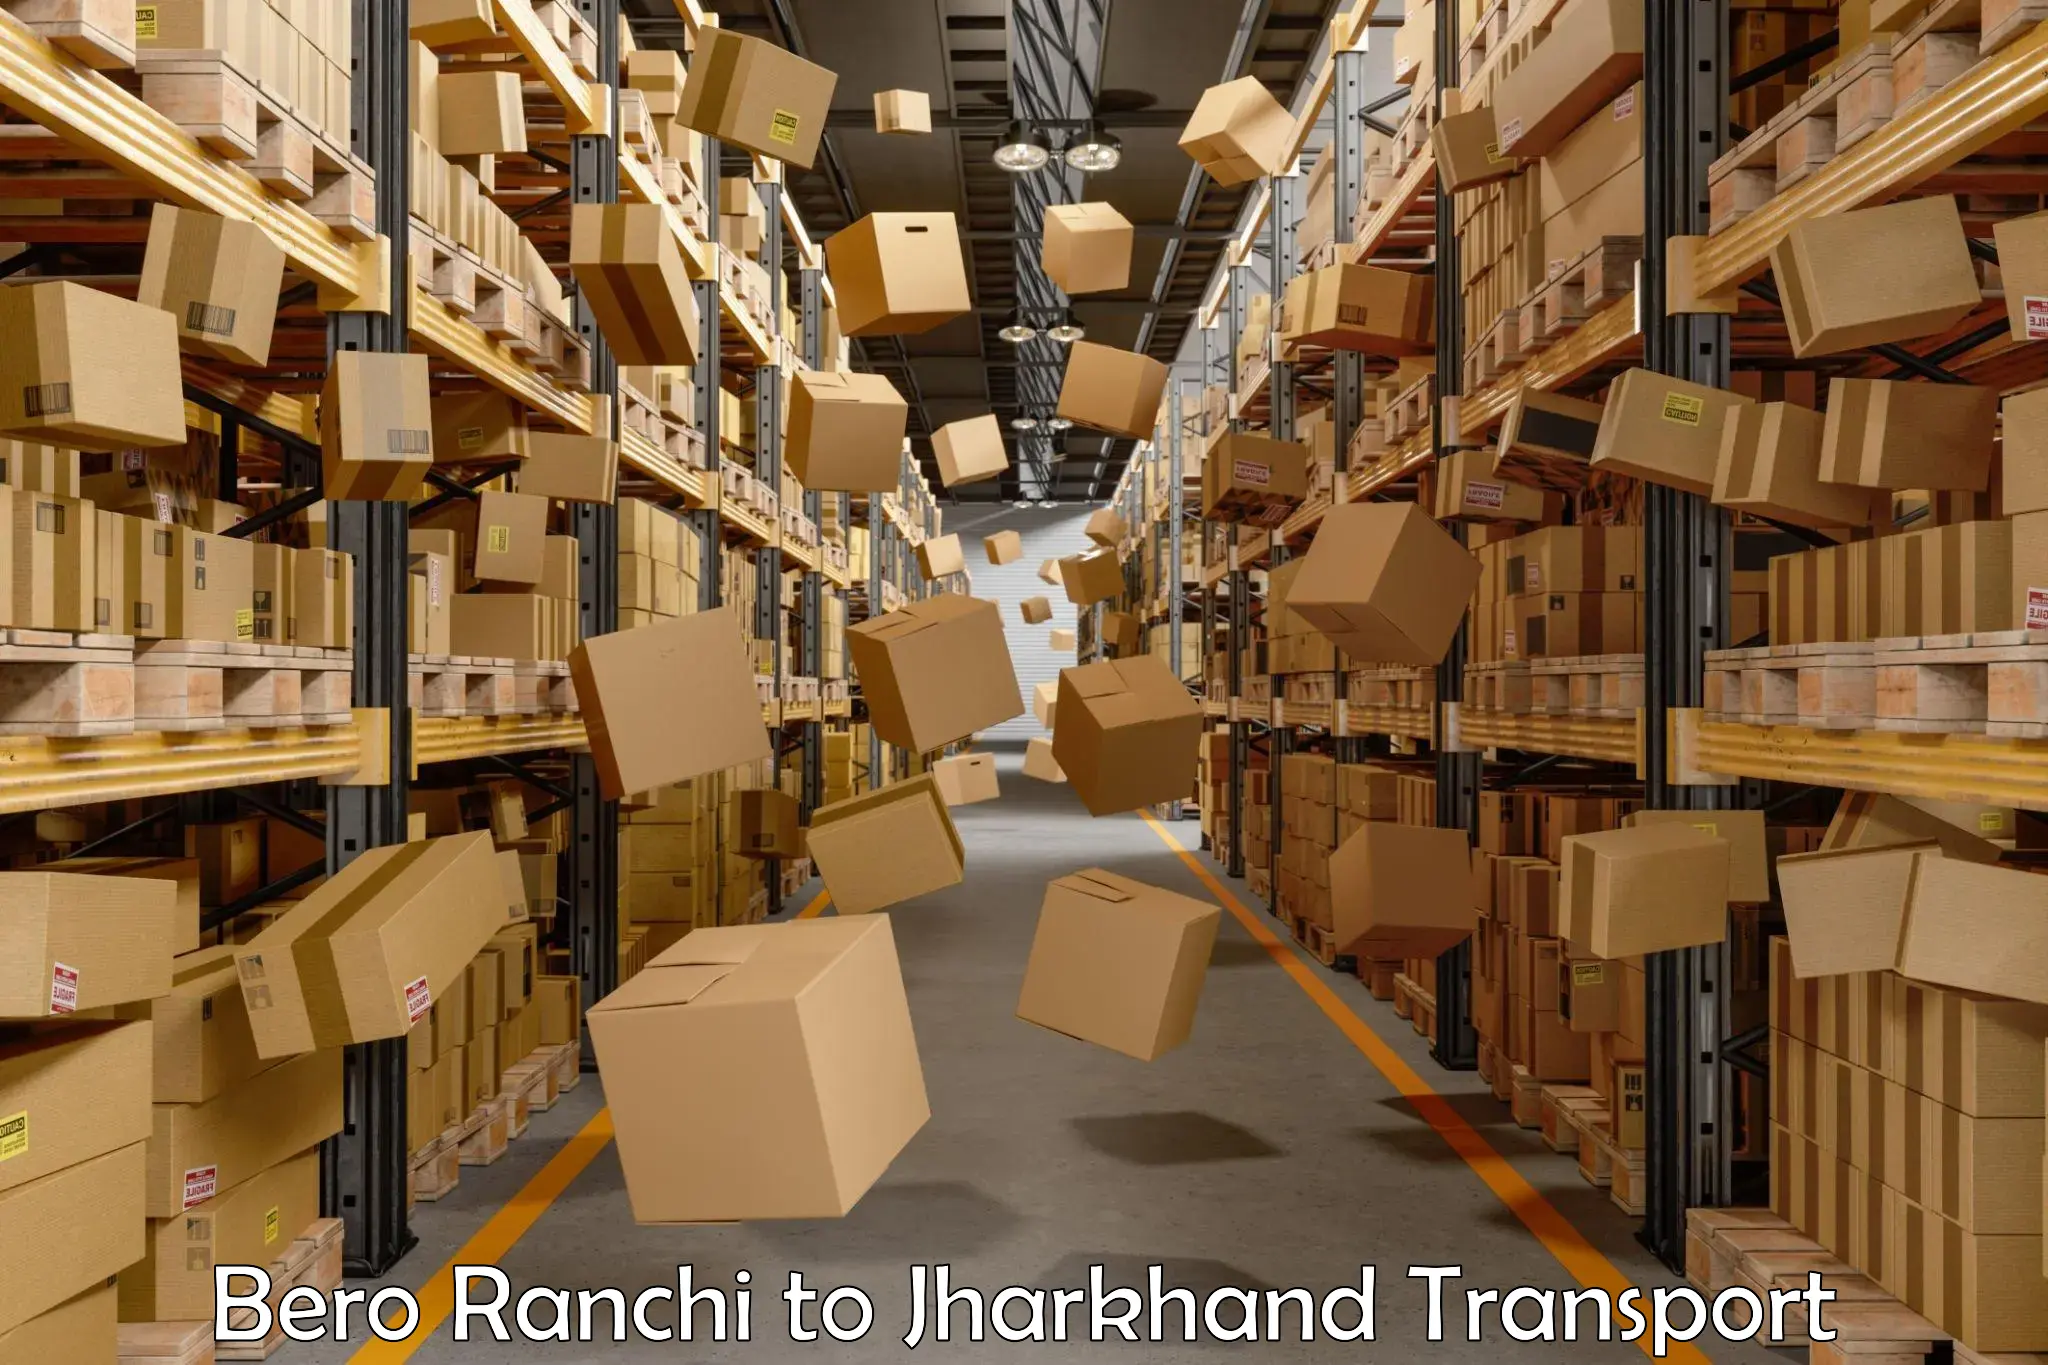 Air freight transport services Bero Ranchi to Jharkhand